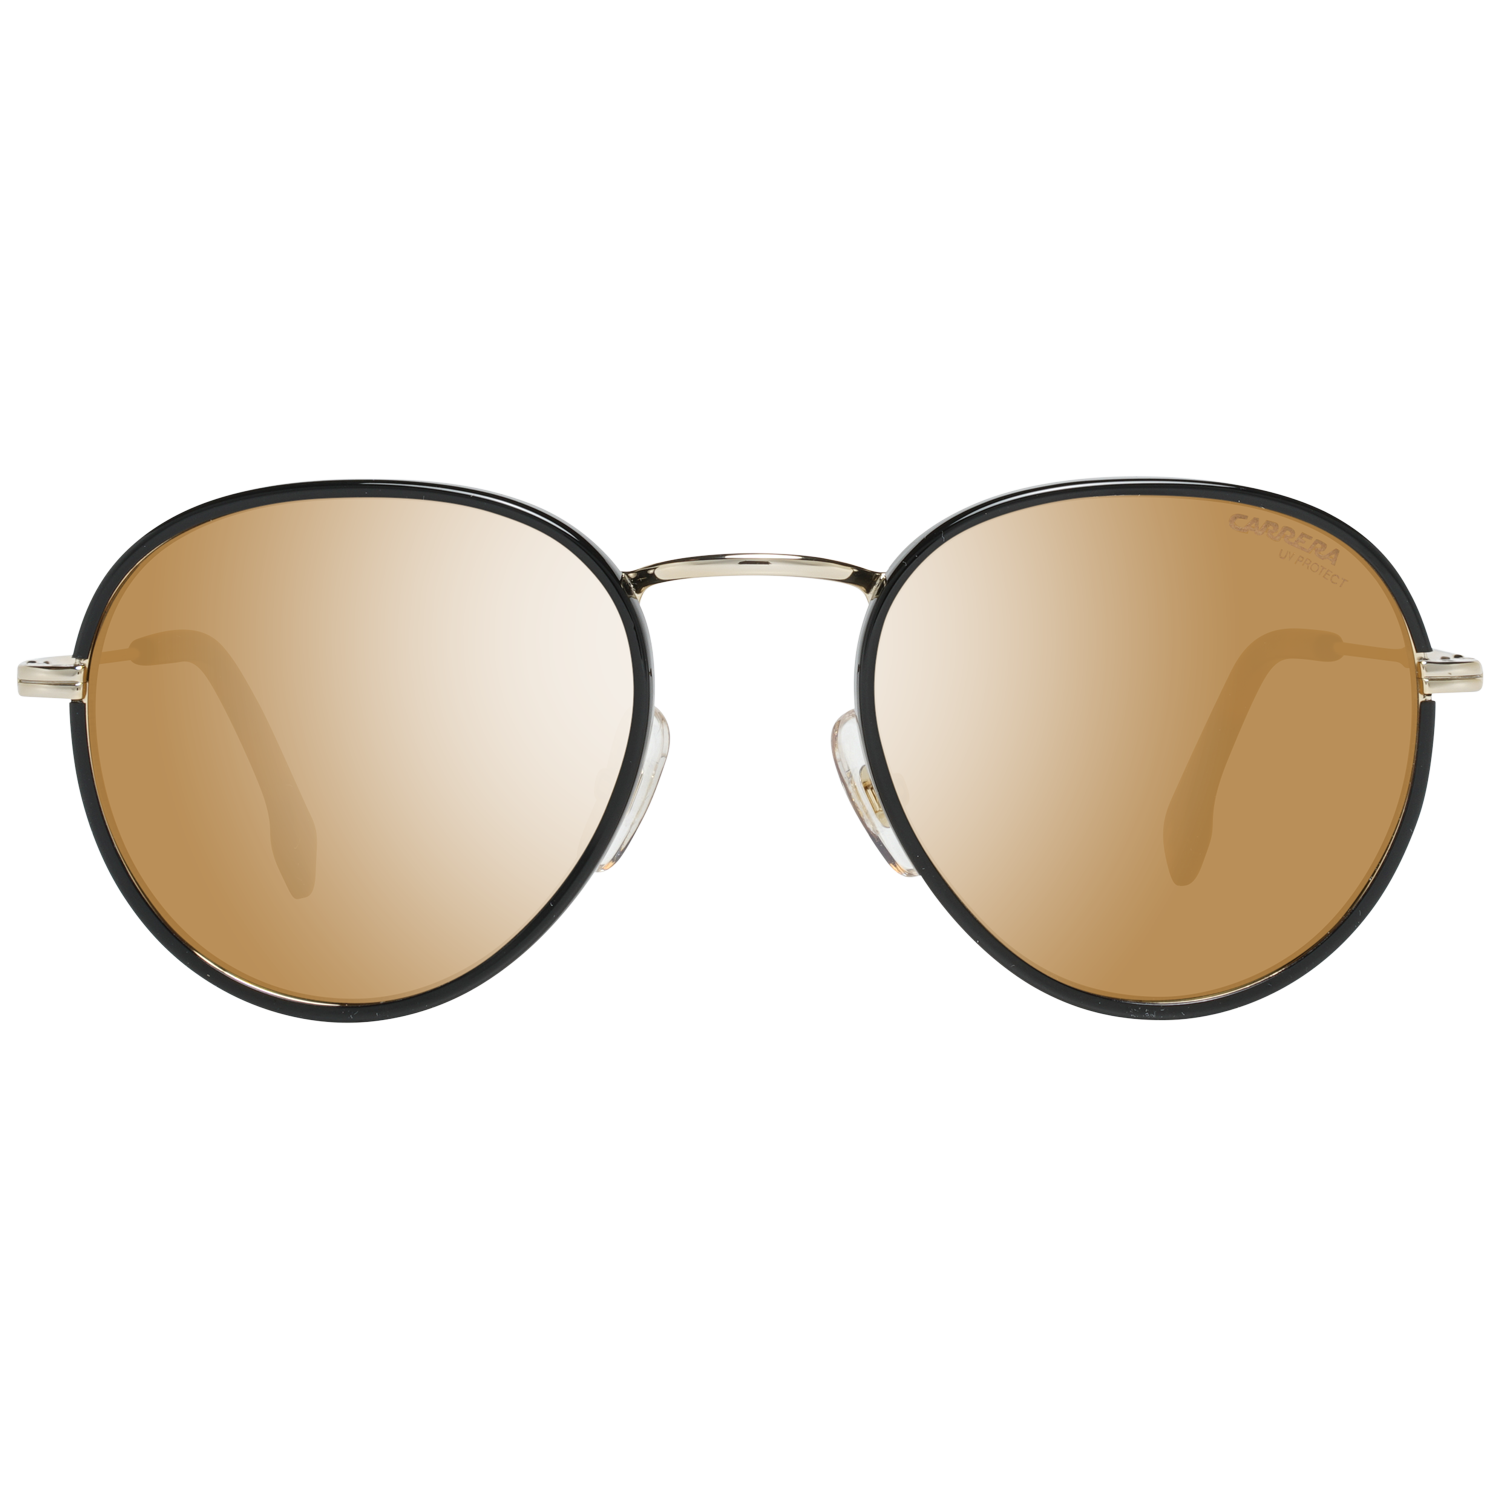 Carrera Sunglasses CA151/S J5G 52 Women Men
Frame color: Gold
Lenses color: Gold
Lenses material: Plastic
Filter category: 3
Style: Oval
Lenses effect: Mirrored
Protection: 100% UVA & UVB
Size: 52-21-145
Lenses width: 52
Lenses height: 47
Bridge width: 21
Frame width: 138
Temples length: 145
Shipment includes: Case, cleaning cloth
Spring hinge: No
Extra: No extra